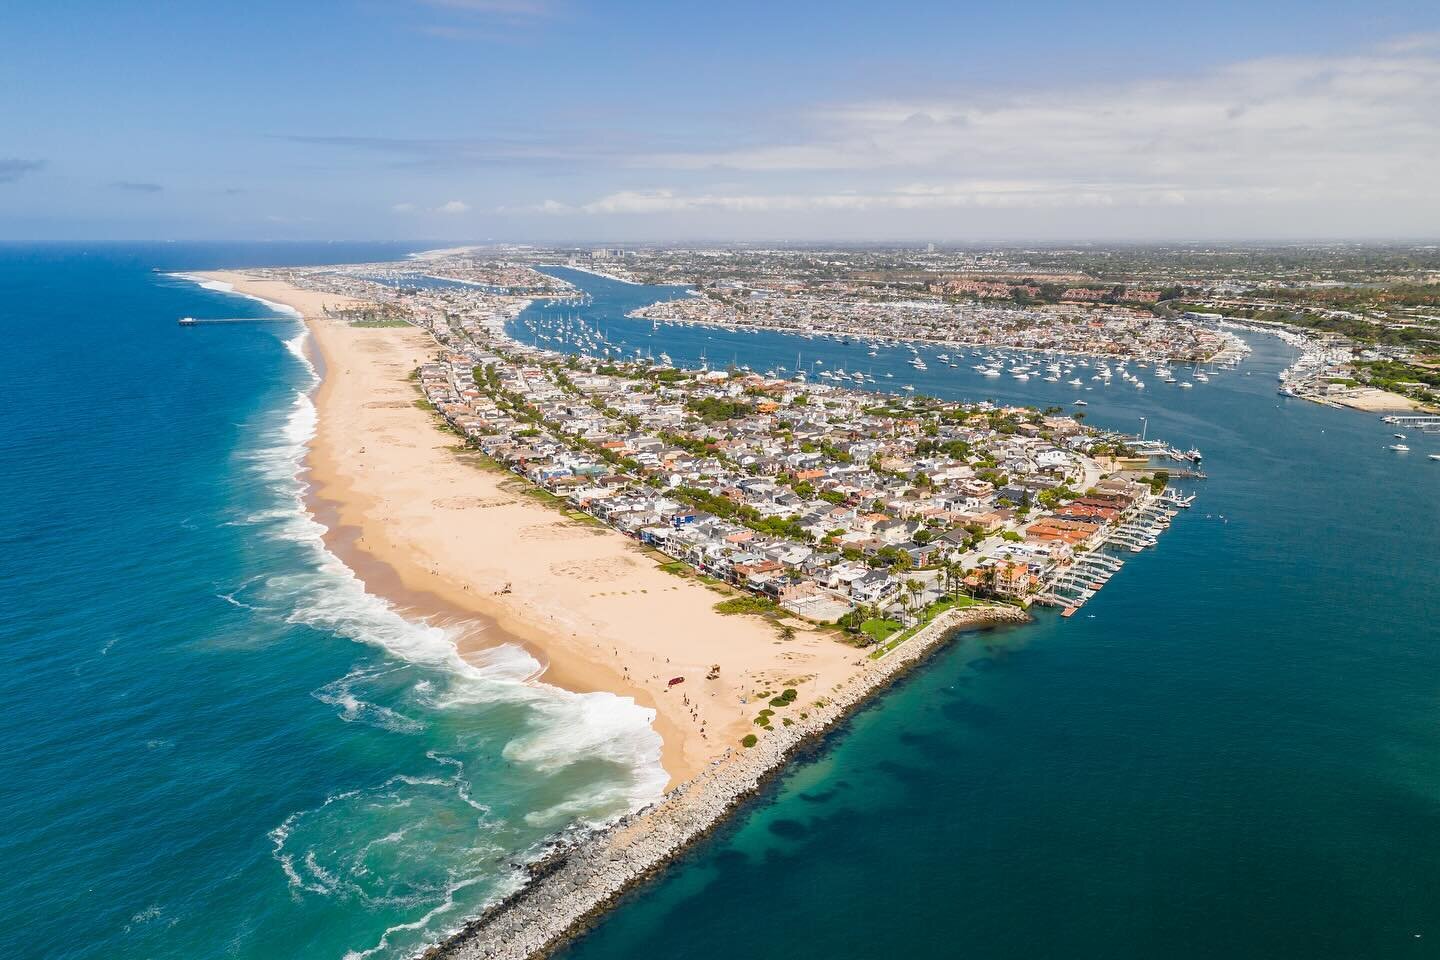 Title Sponsor - Visit Newport Beach 

As the official Destination Marketing Organization for the city of Newport Beach, Visit Newport Beach is the ultimate resource for Newport Beach travel and tourism. The team of destination and marketing experts a